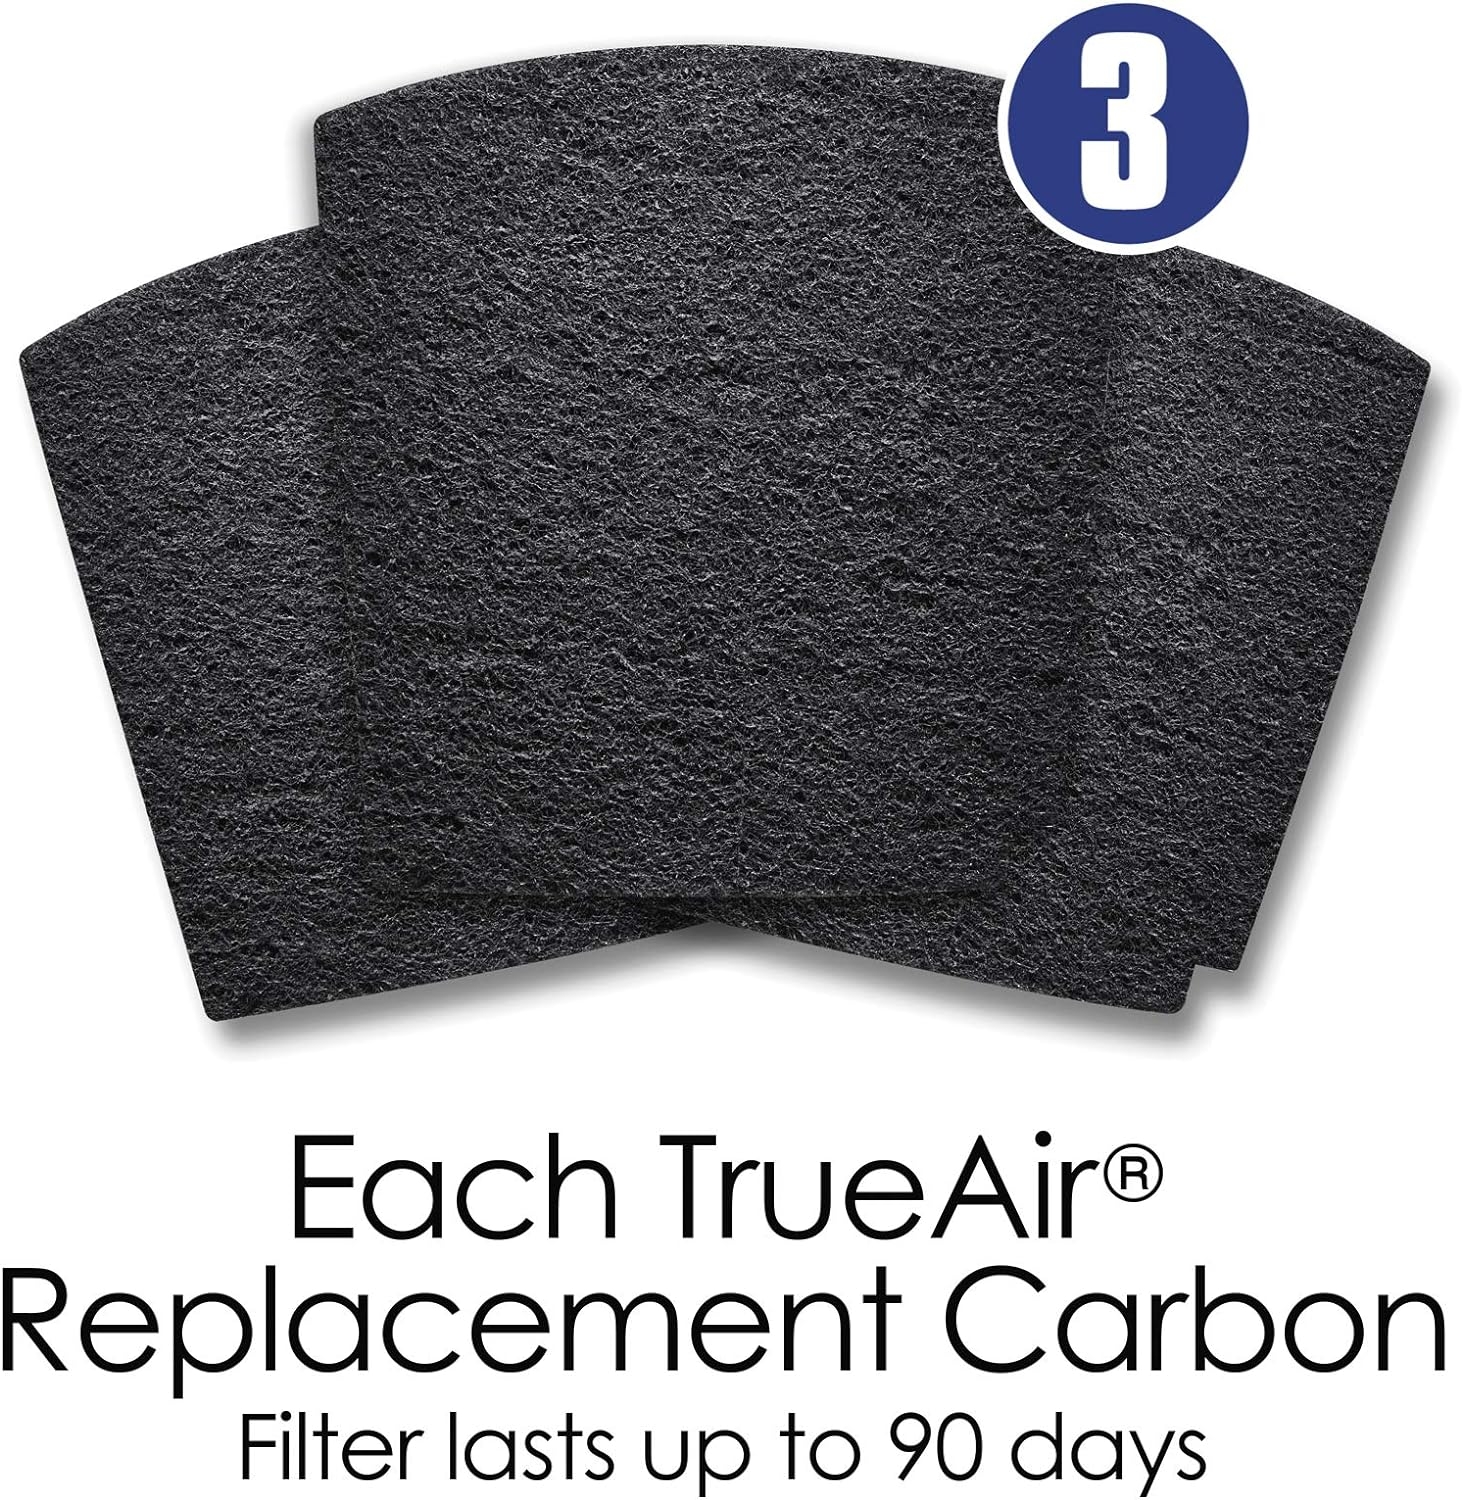 Hamilton Beach TrueAir Replacement Carbon Filter for Odor Eliminators, Common Household-Trash, Pet, Smoke and Bathroom, 3-Pack (04230G)